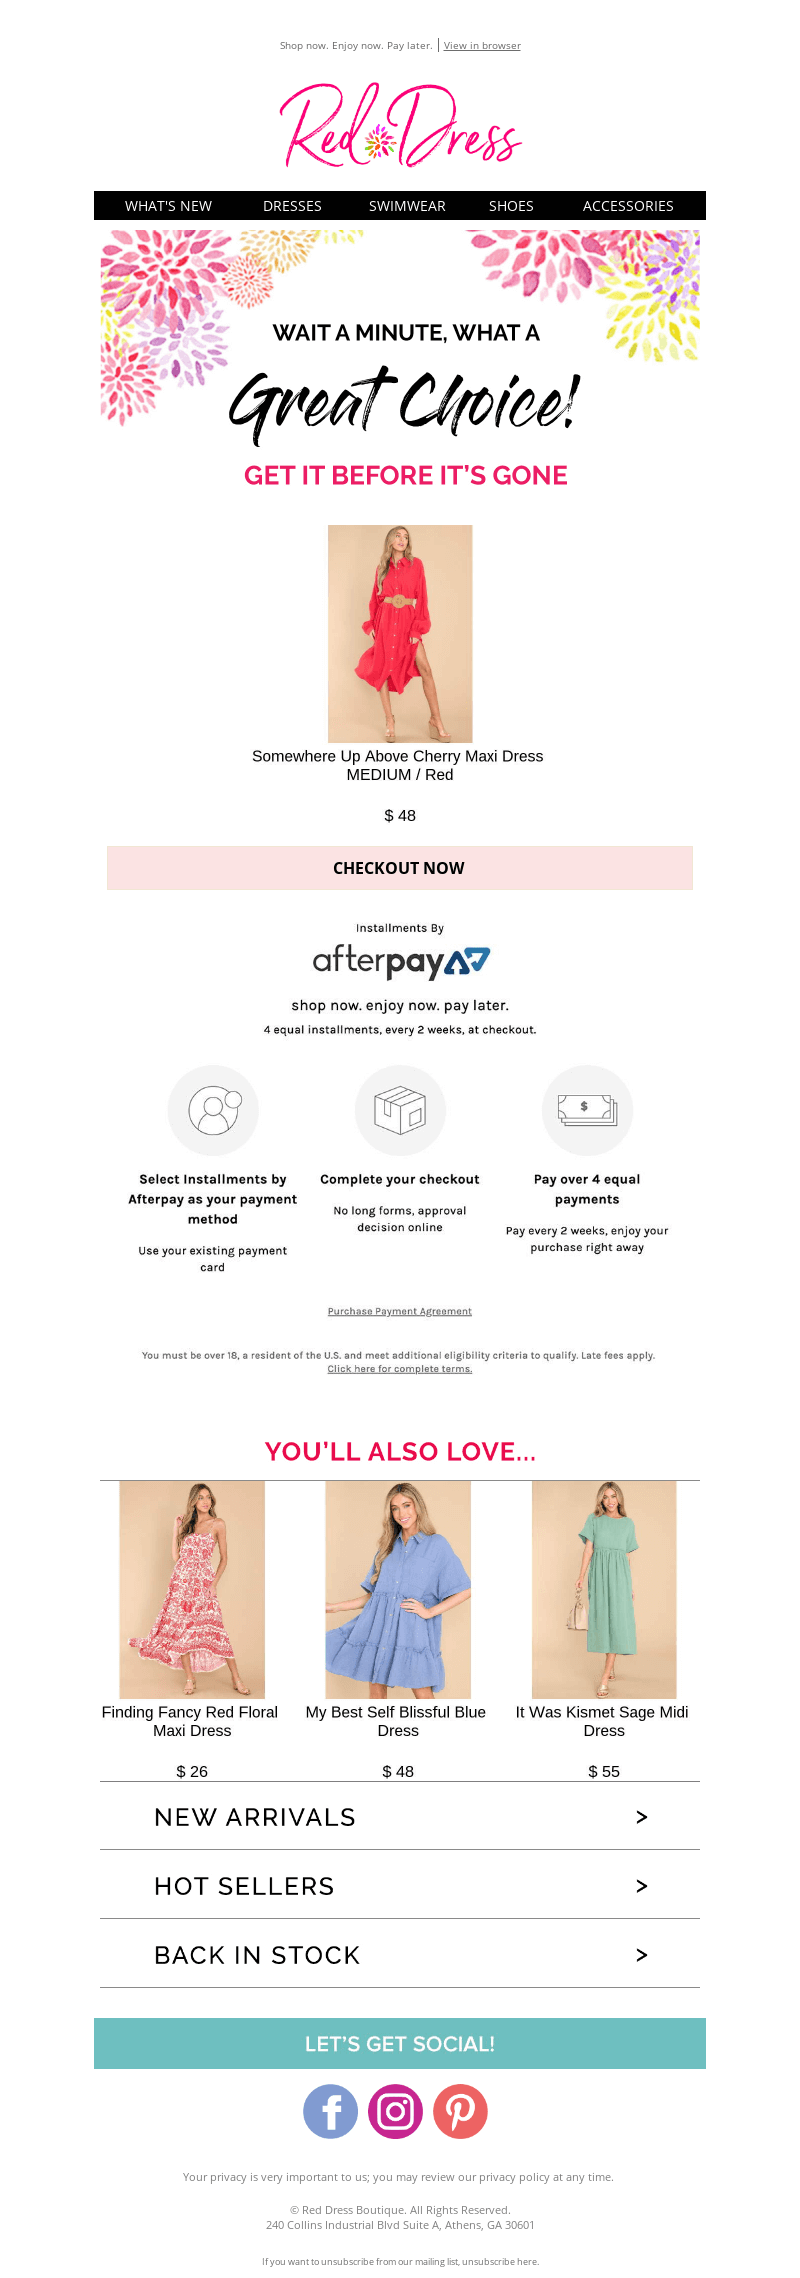 A cart abandonment email from Red Dress. The email features a link to checkout, payment option description, and product recommendations.